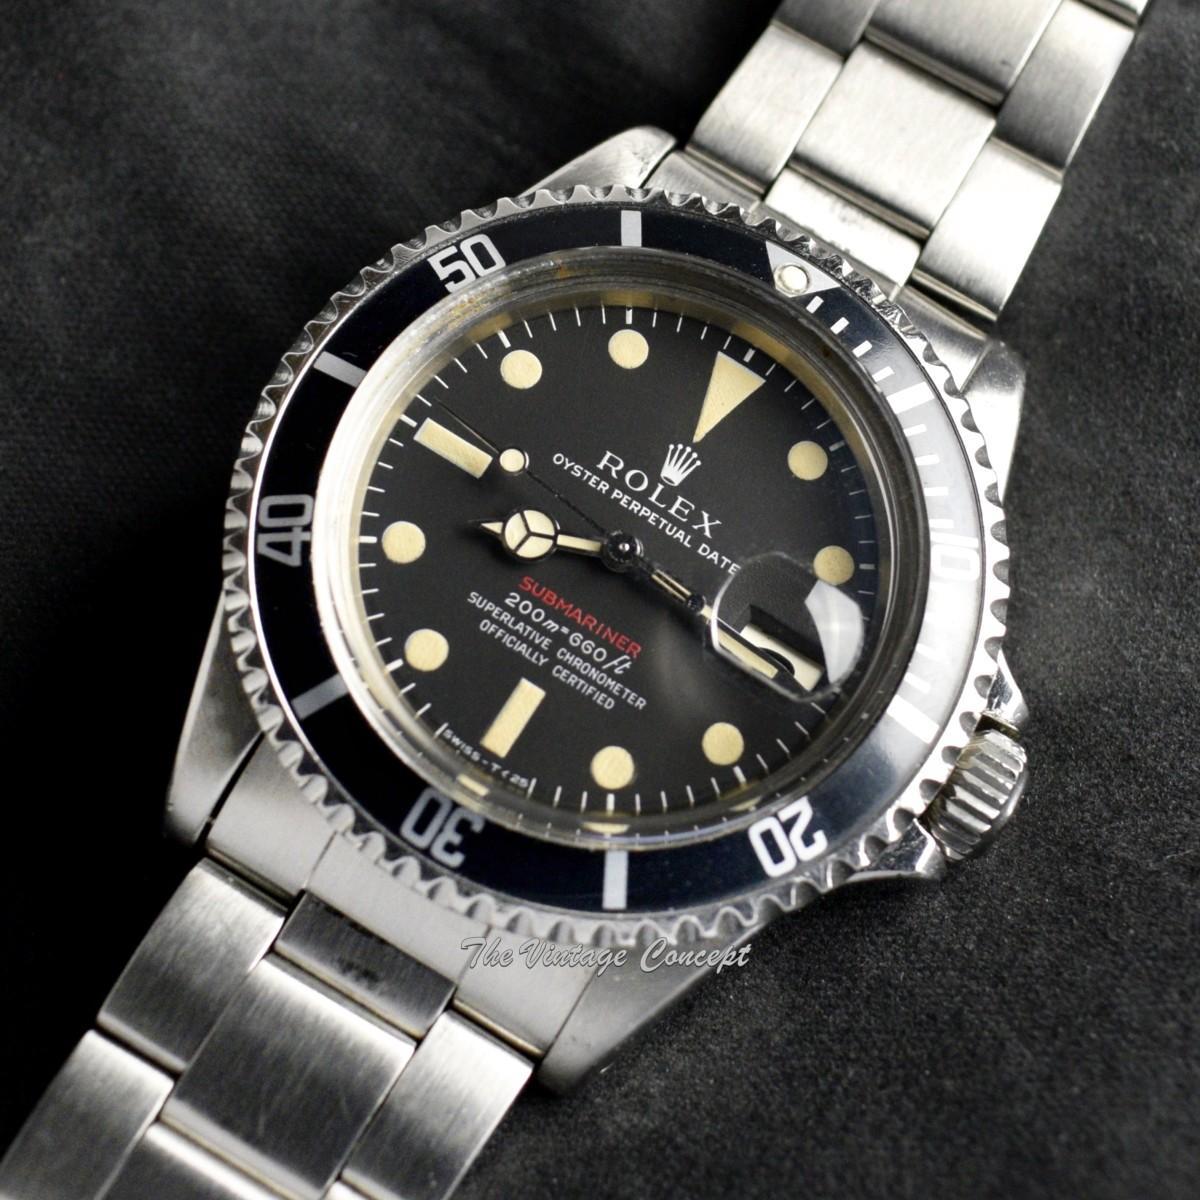 Rolex Submariner Single Red MK II Tropical Dial 1680 - The Vintage